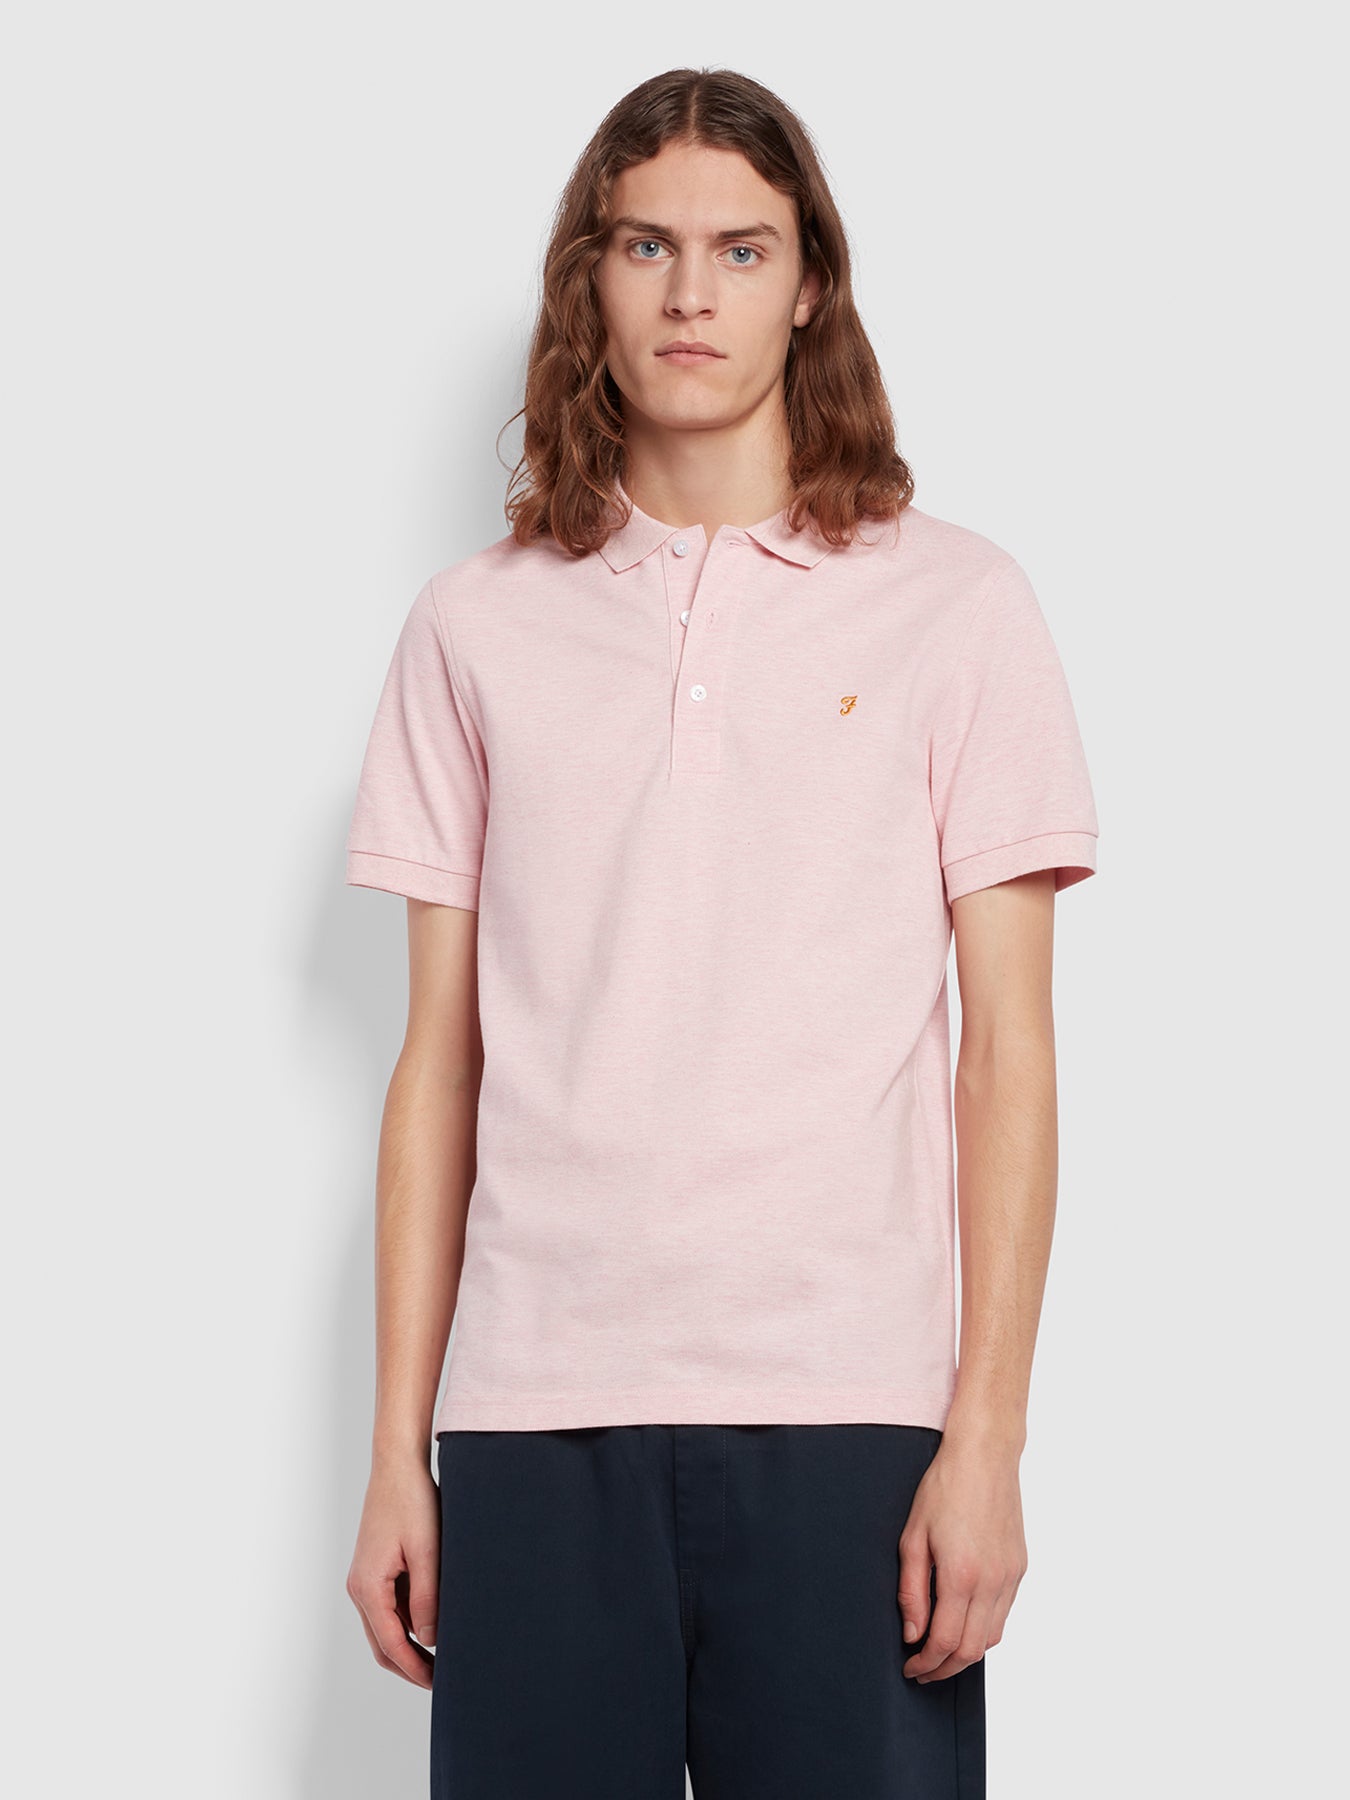 View Blanes Slim Fit Short Sleeve Polo Shirt In Mid Pink Marl information